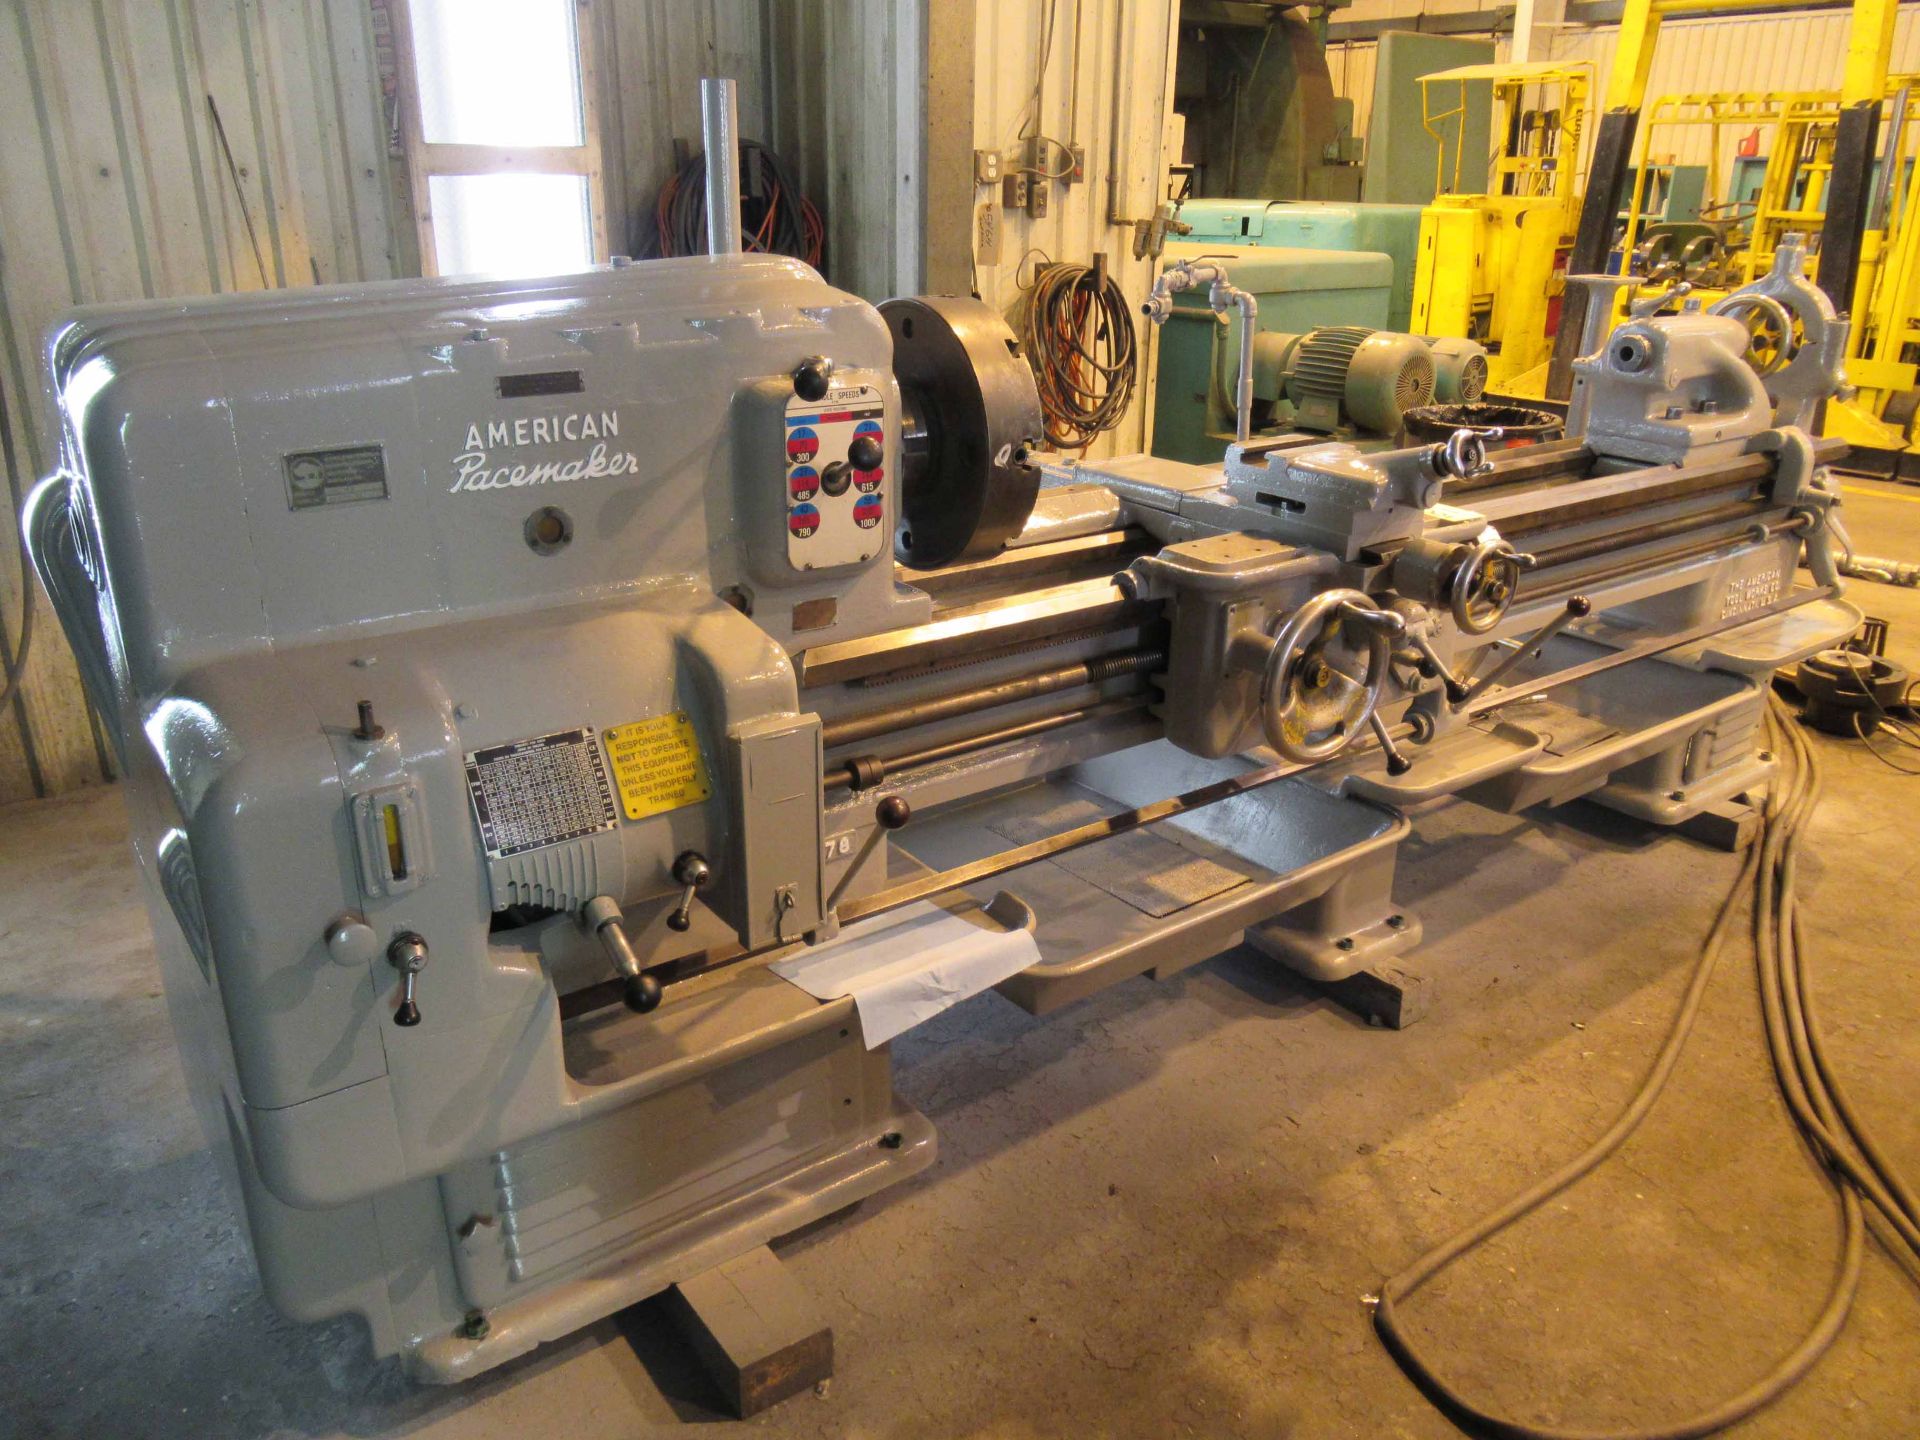 ENGINE LATHE, AMERICAN PACEMAKER 16" X 78", 15" dia 4-jaw chuck, taper, steady rest, spds: 17-1, - Image 2 of 4